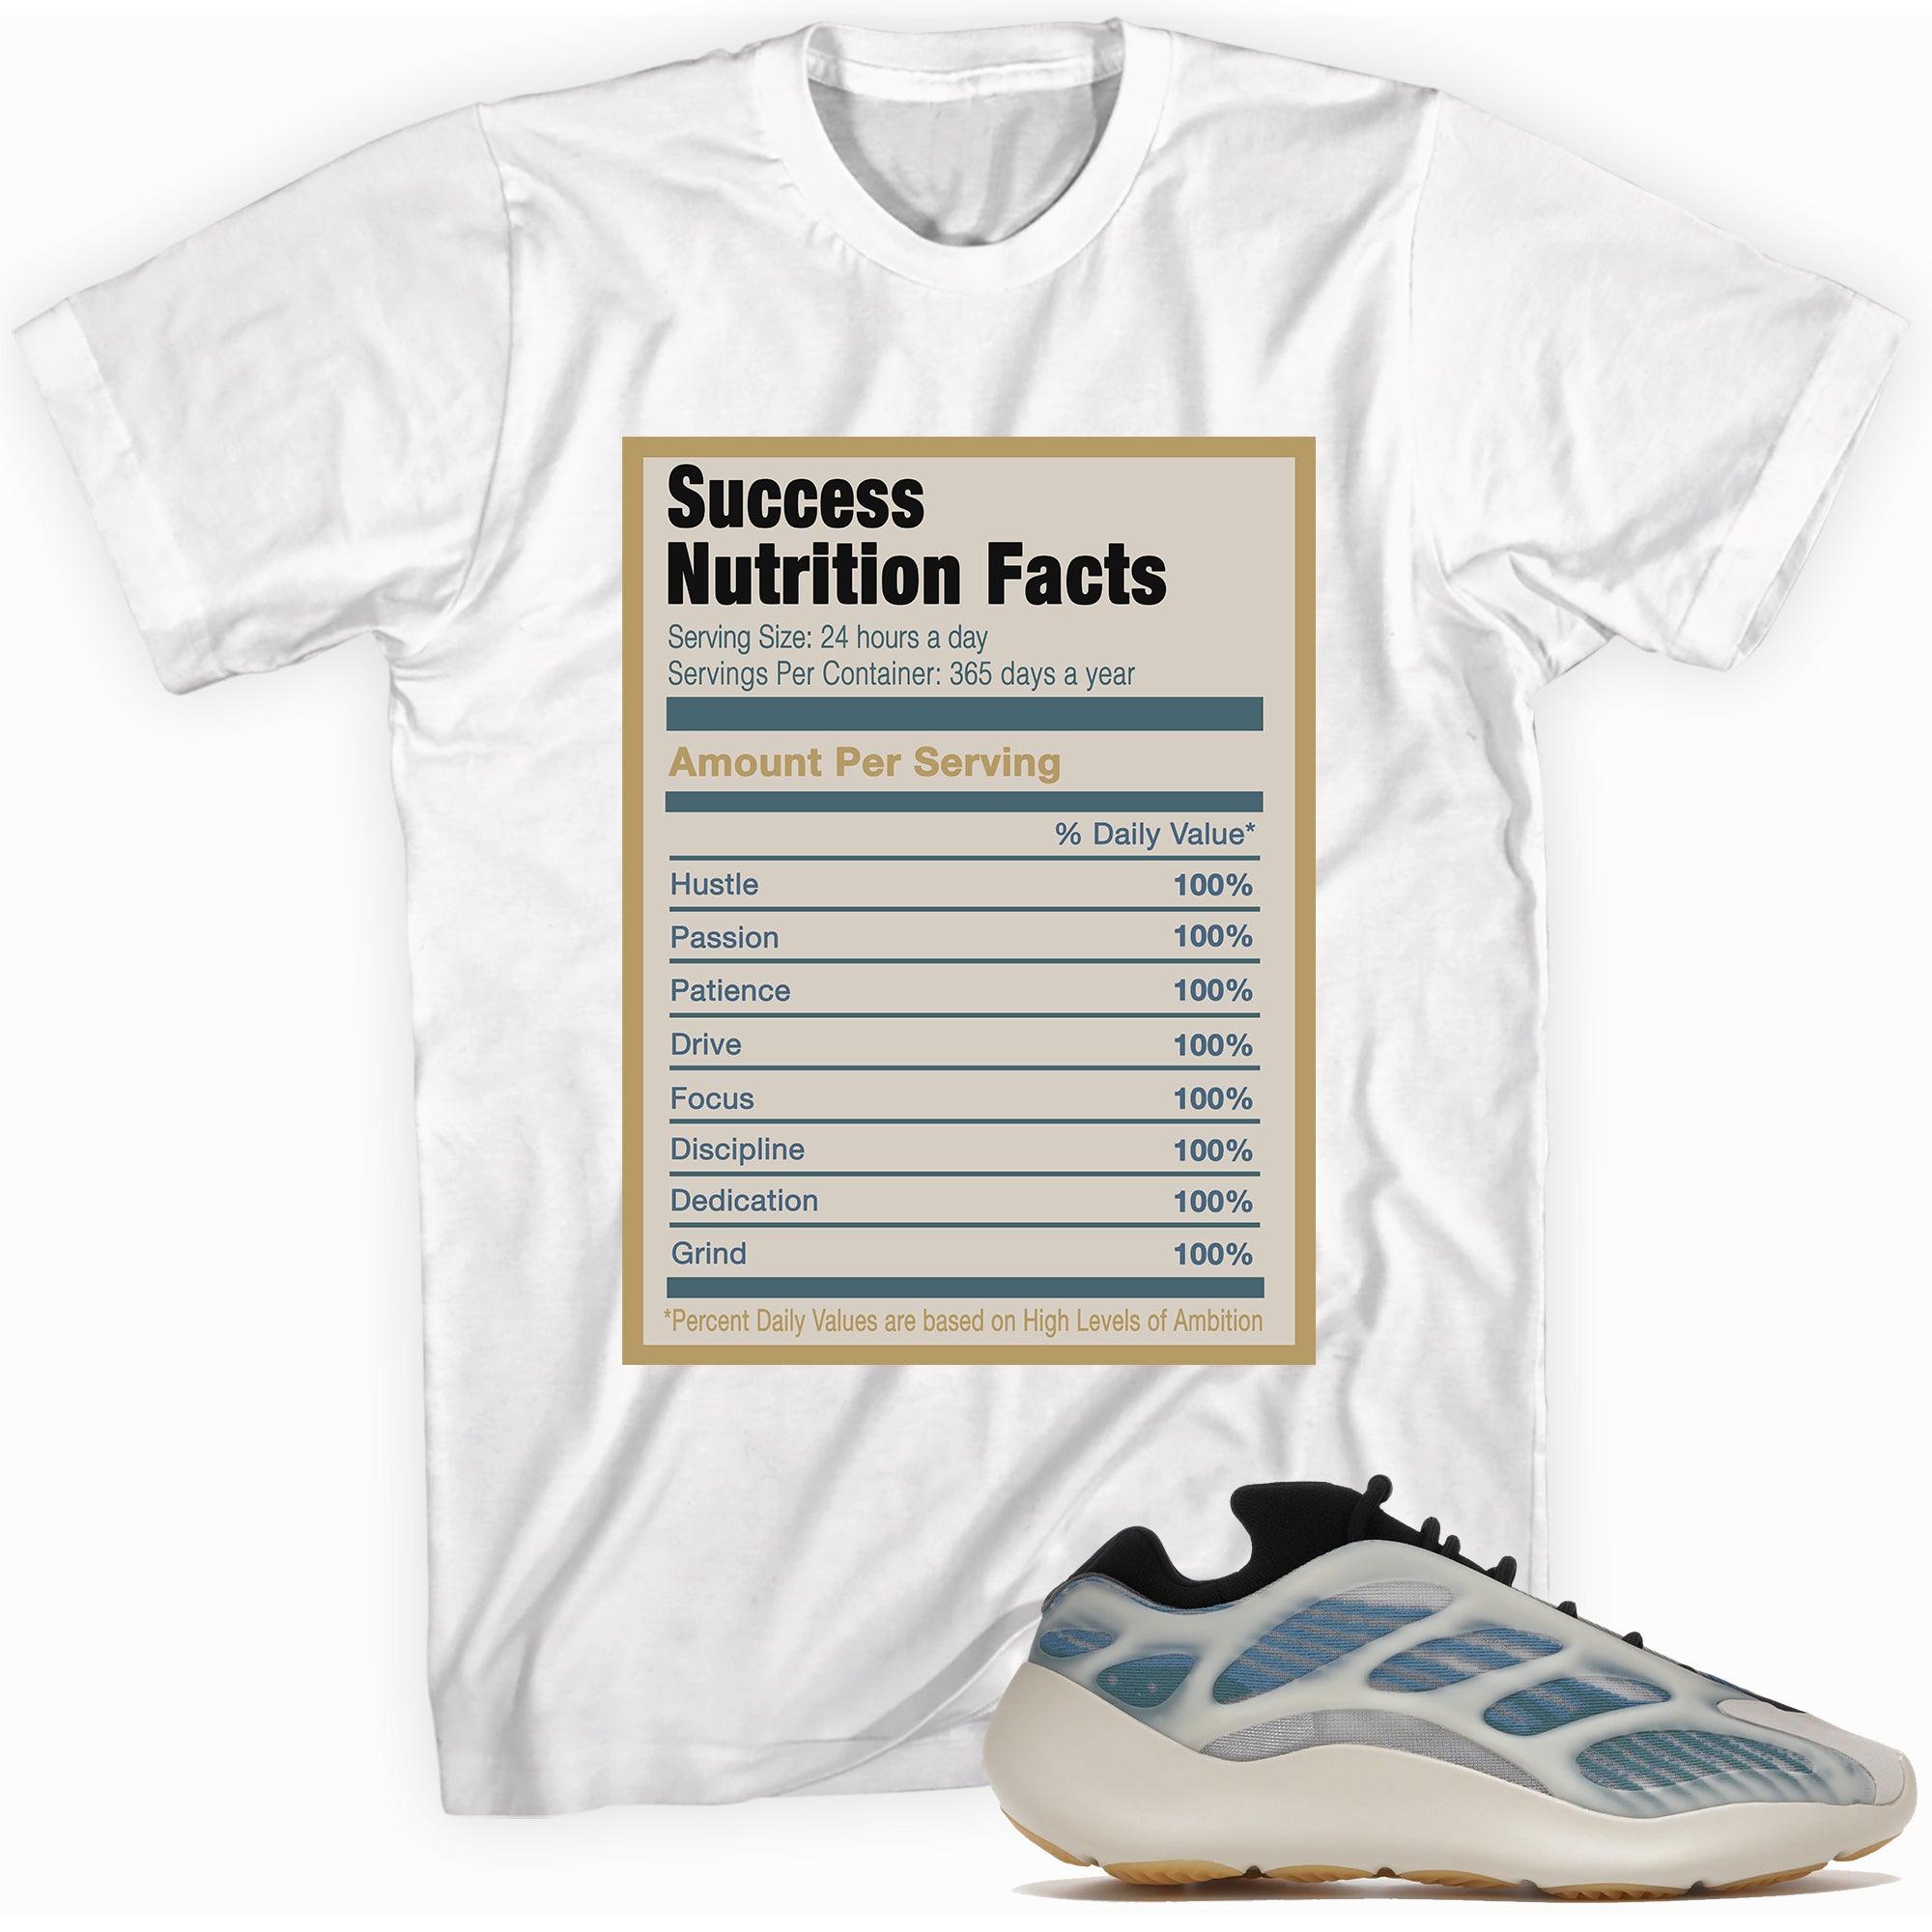 Success Nutrition Facts Sneaker Tee Yeezy 700 V3 Kyanite photo